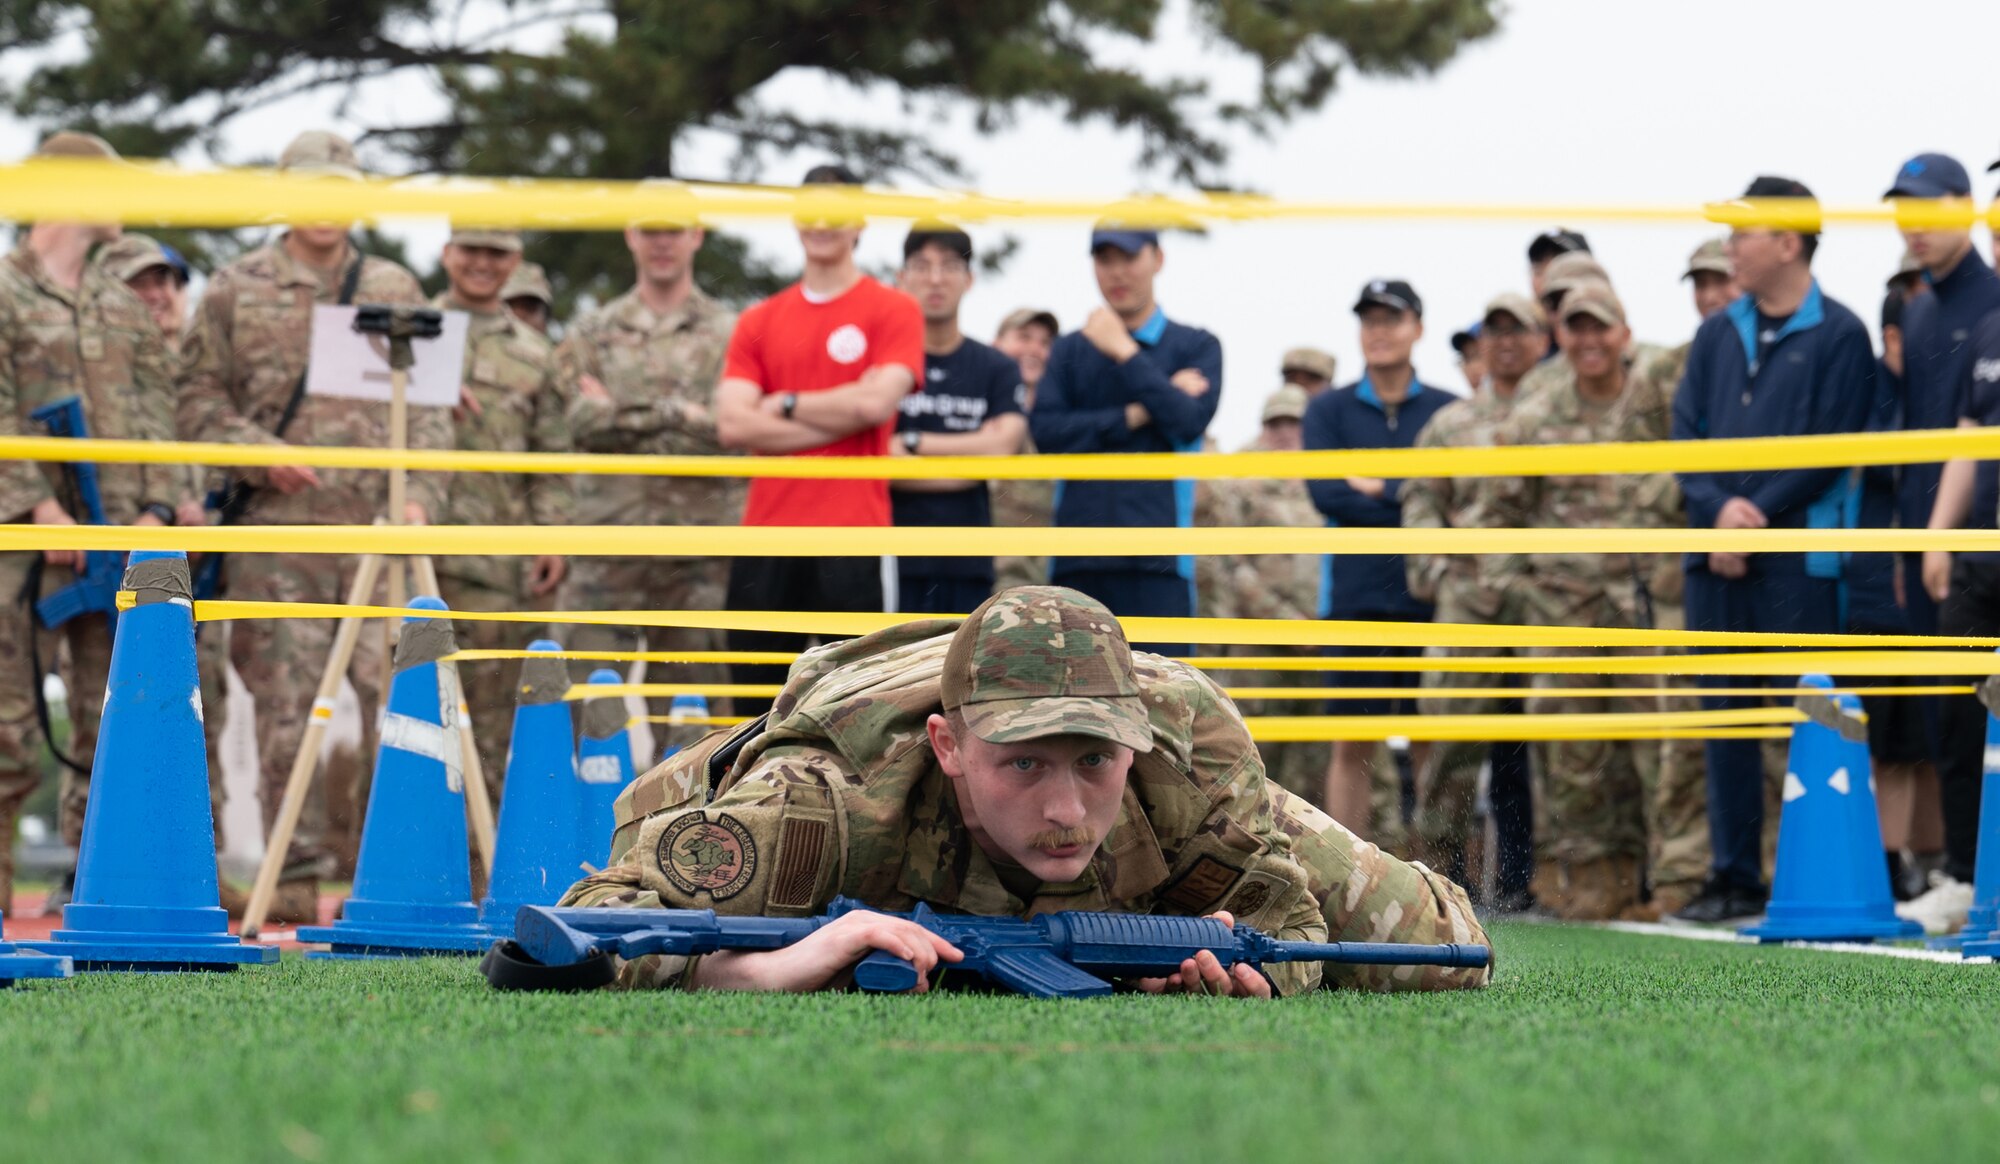 8th Civil Engineer Squadron firefighter, demonstrates how to low crawl during a training event at Kunsan Air Base